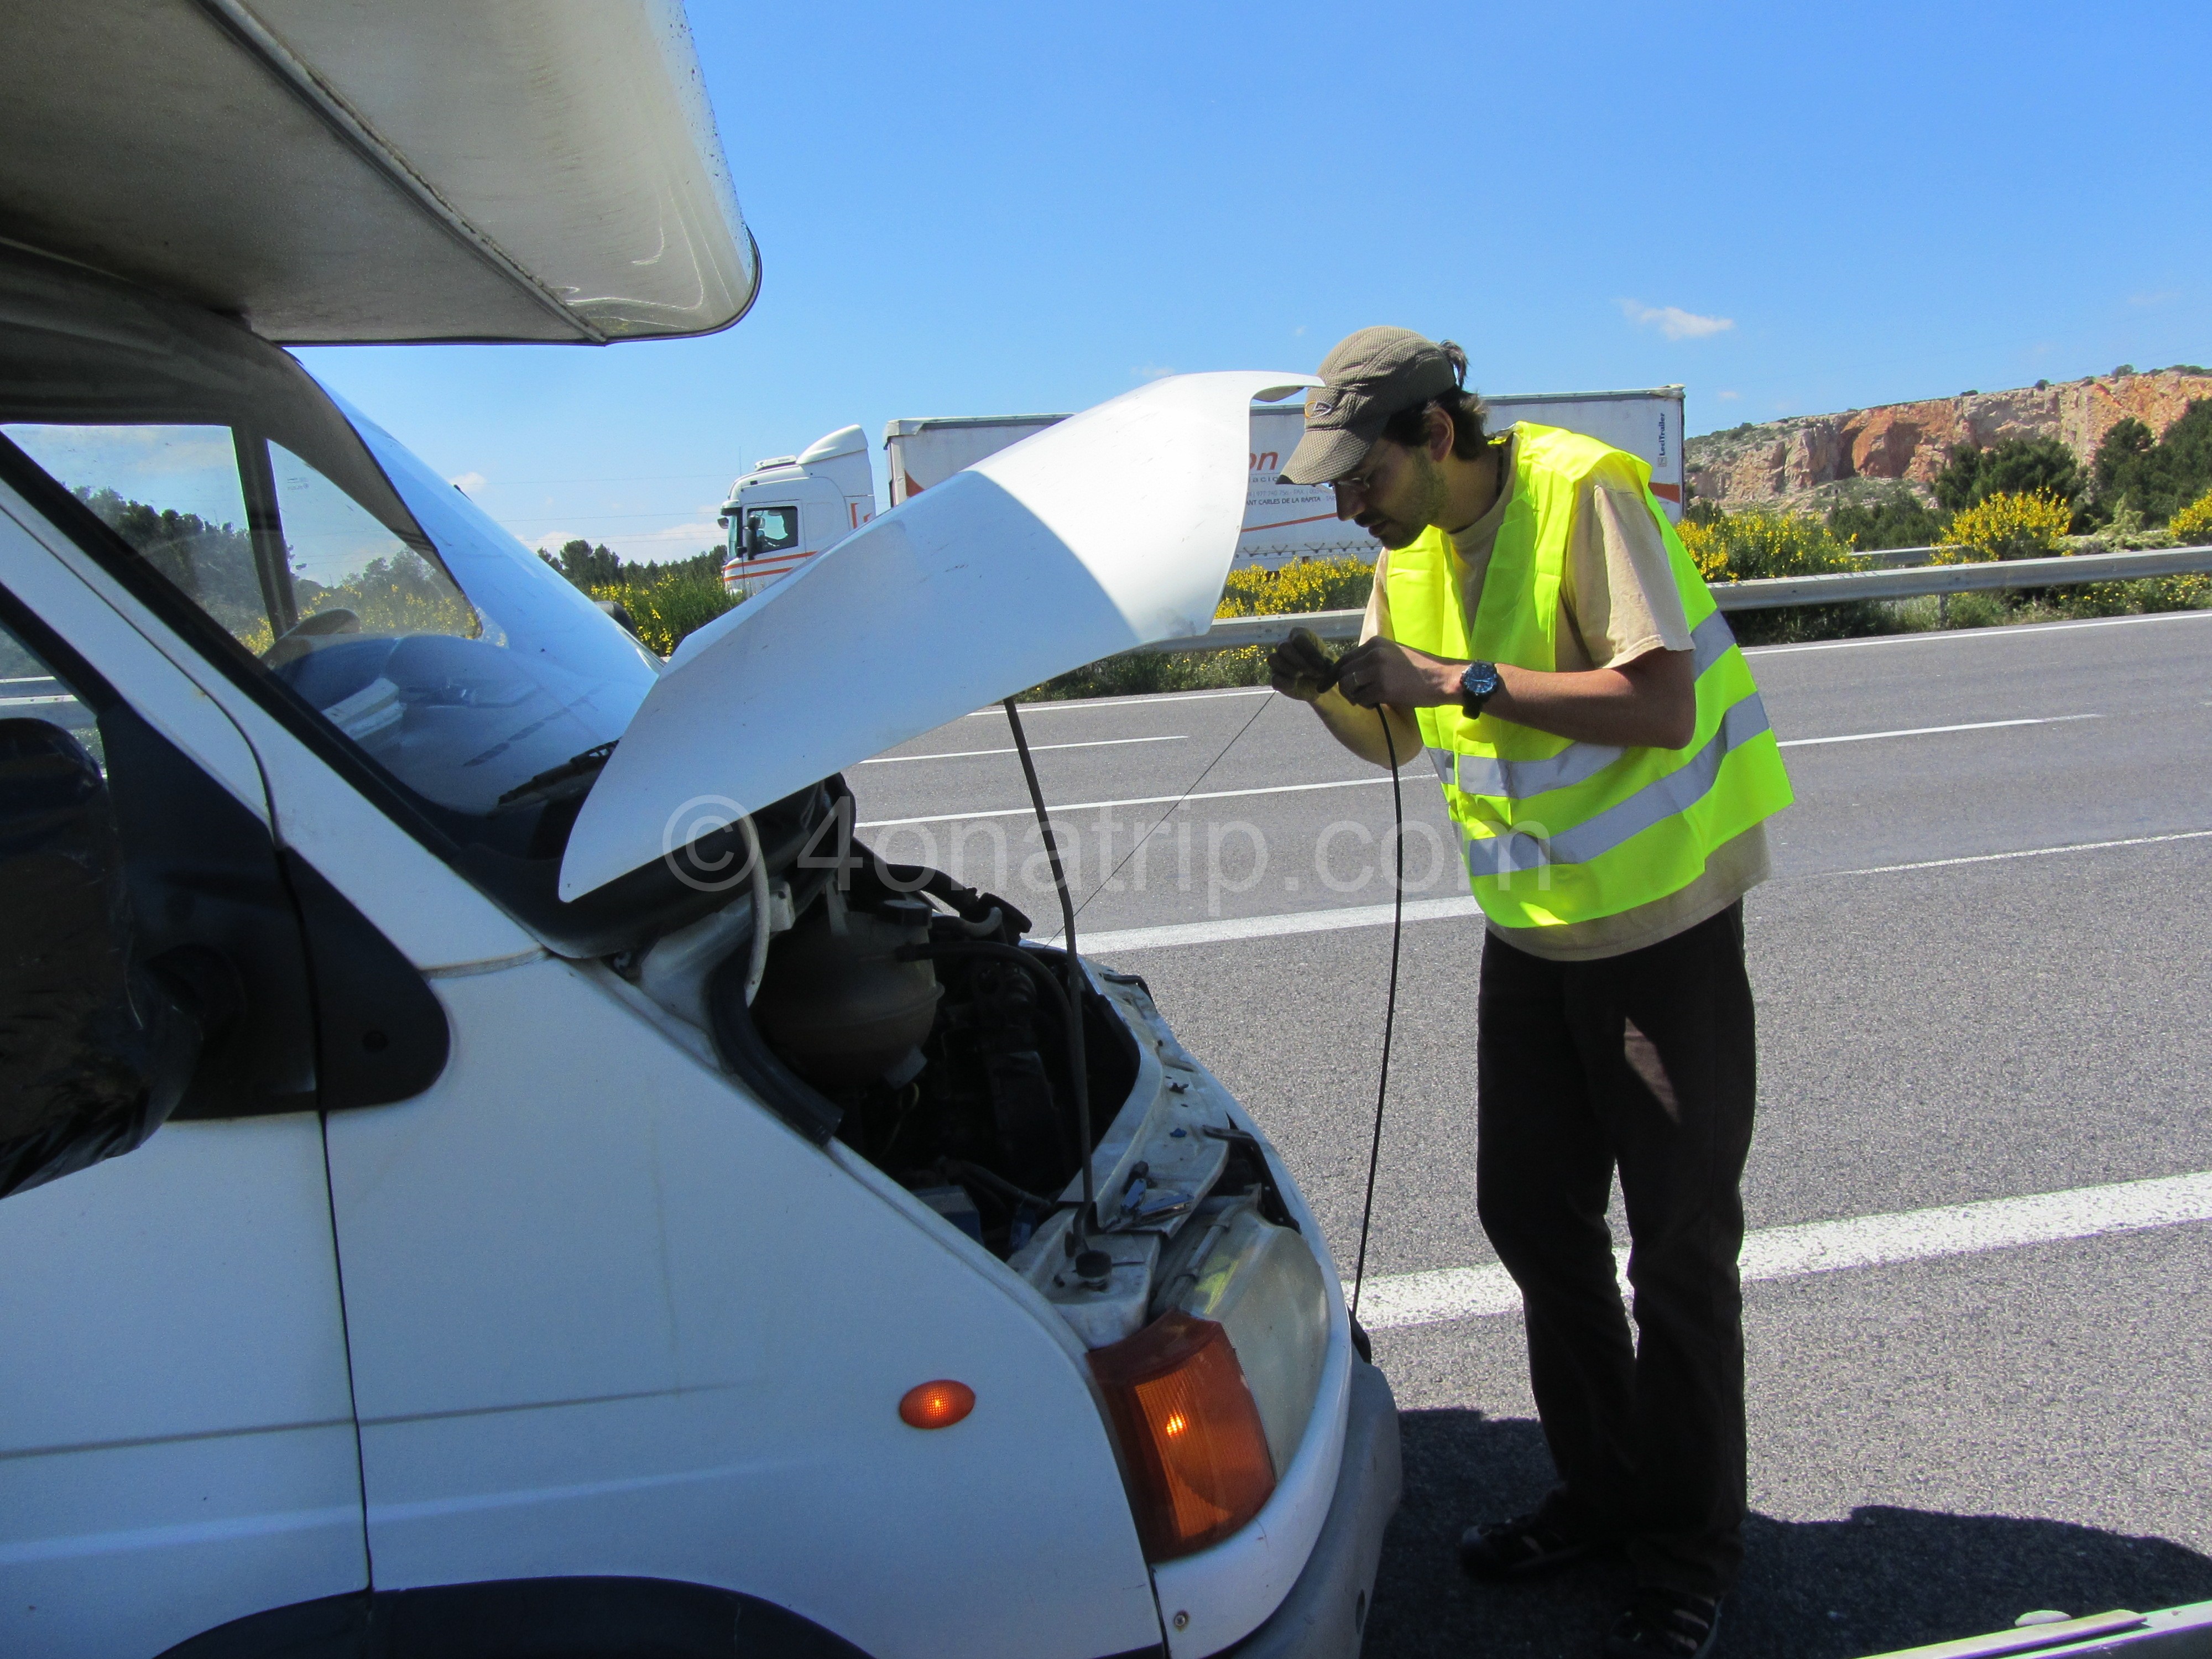 Breakdown on the Autovia in southern France